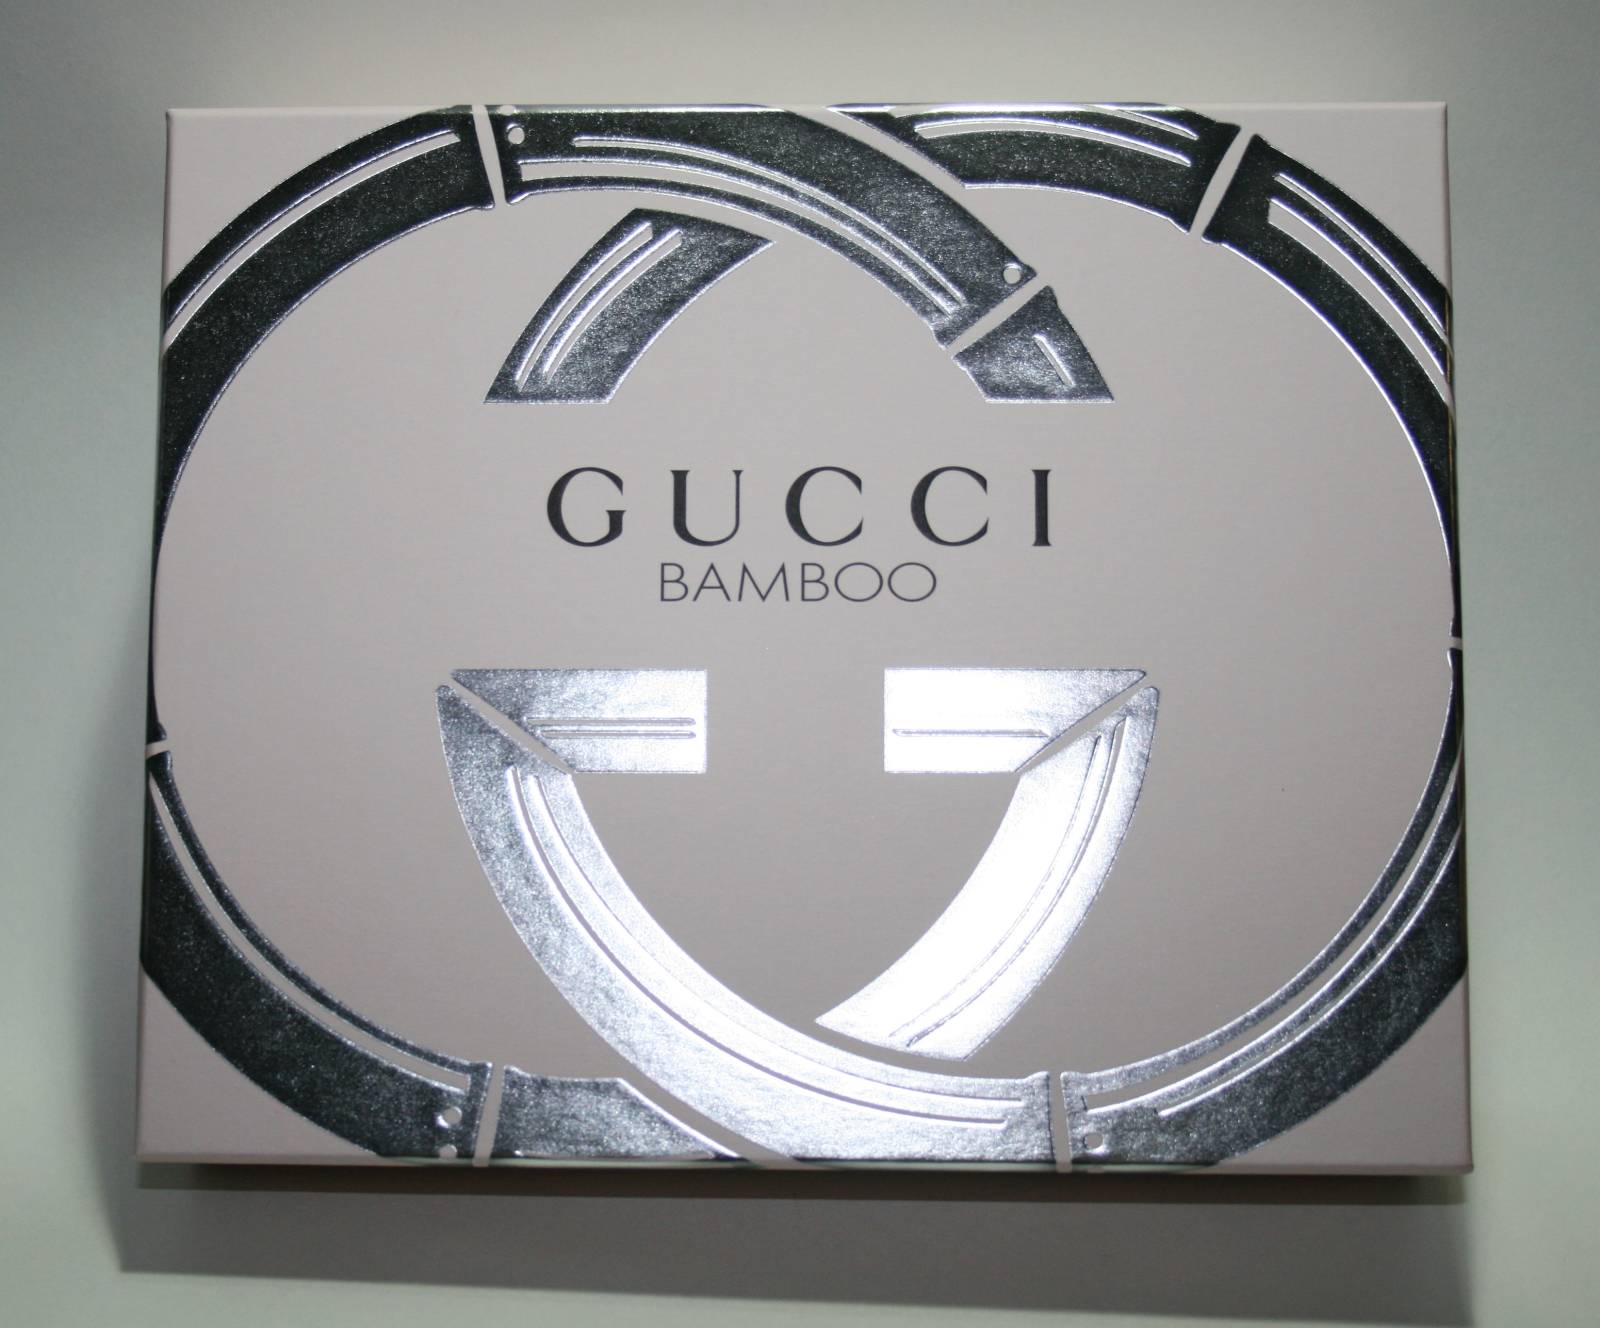 12 Gifts of Christmas: Gucci Bamboo EDP Gift Set for Her - Beauty Geek